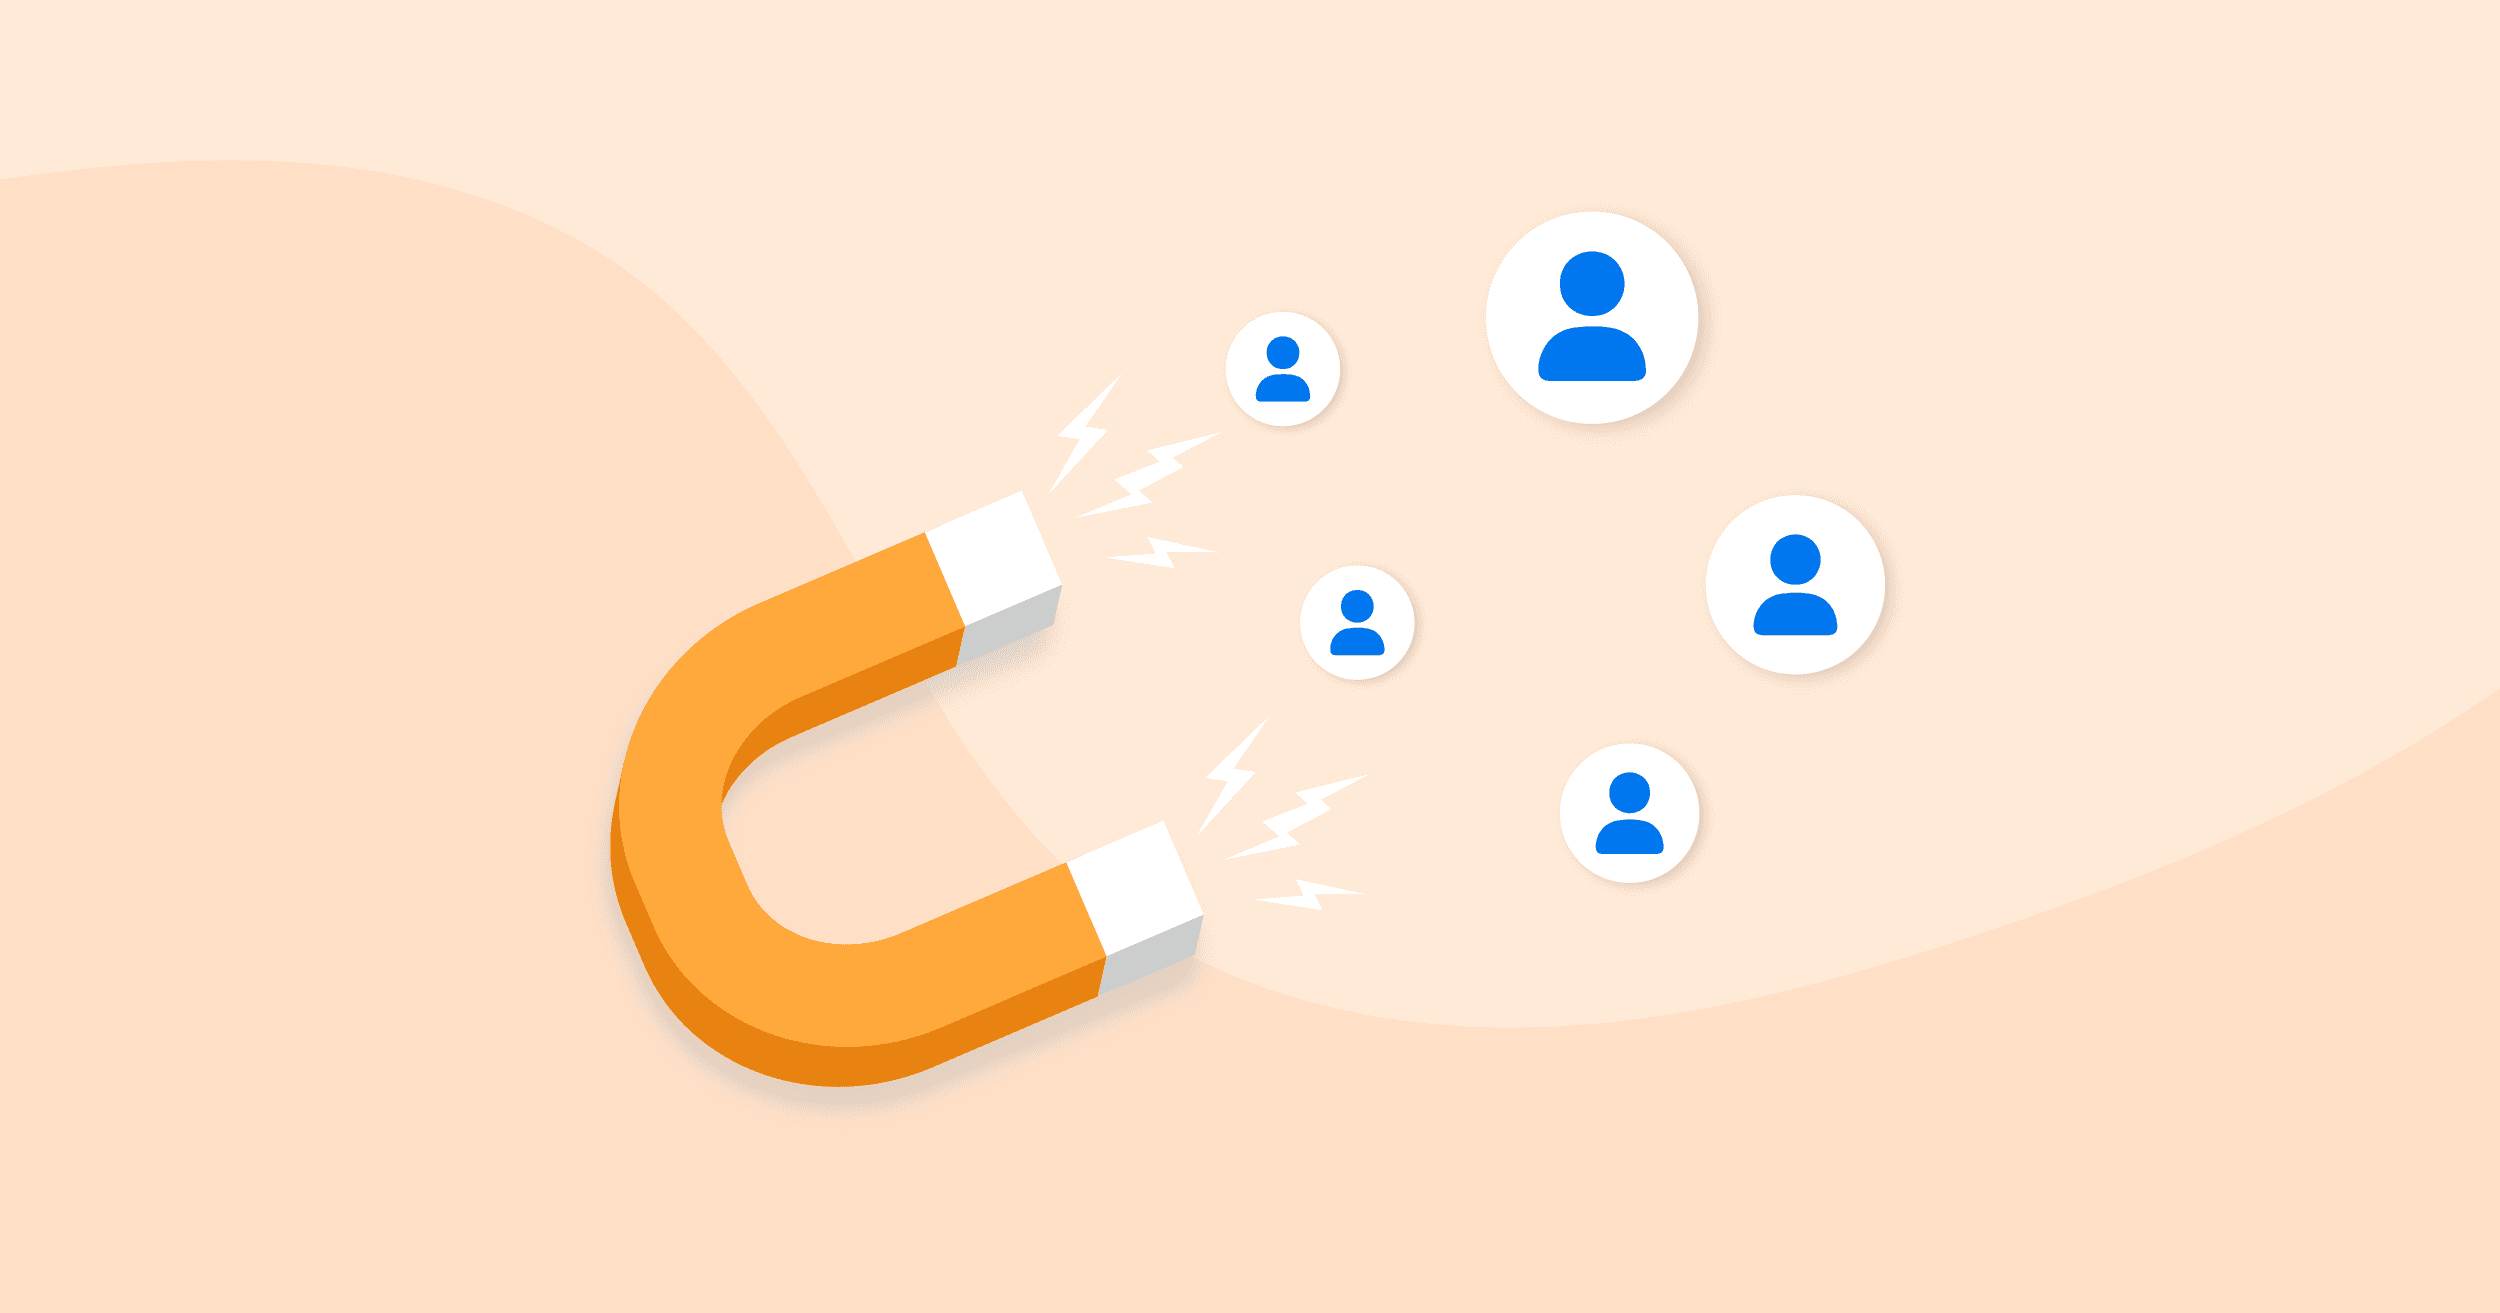 Client Retention using magnet to keep clients longer